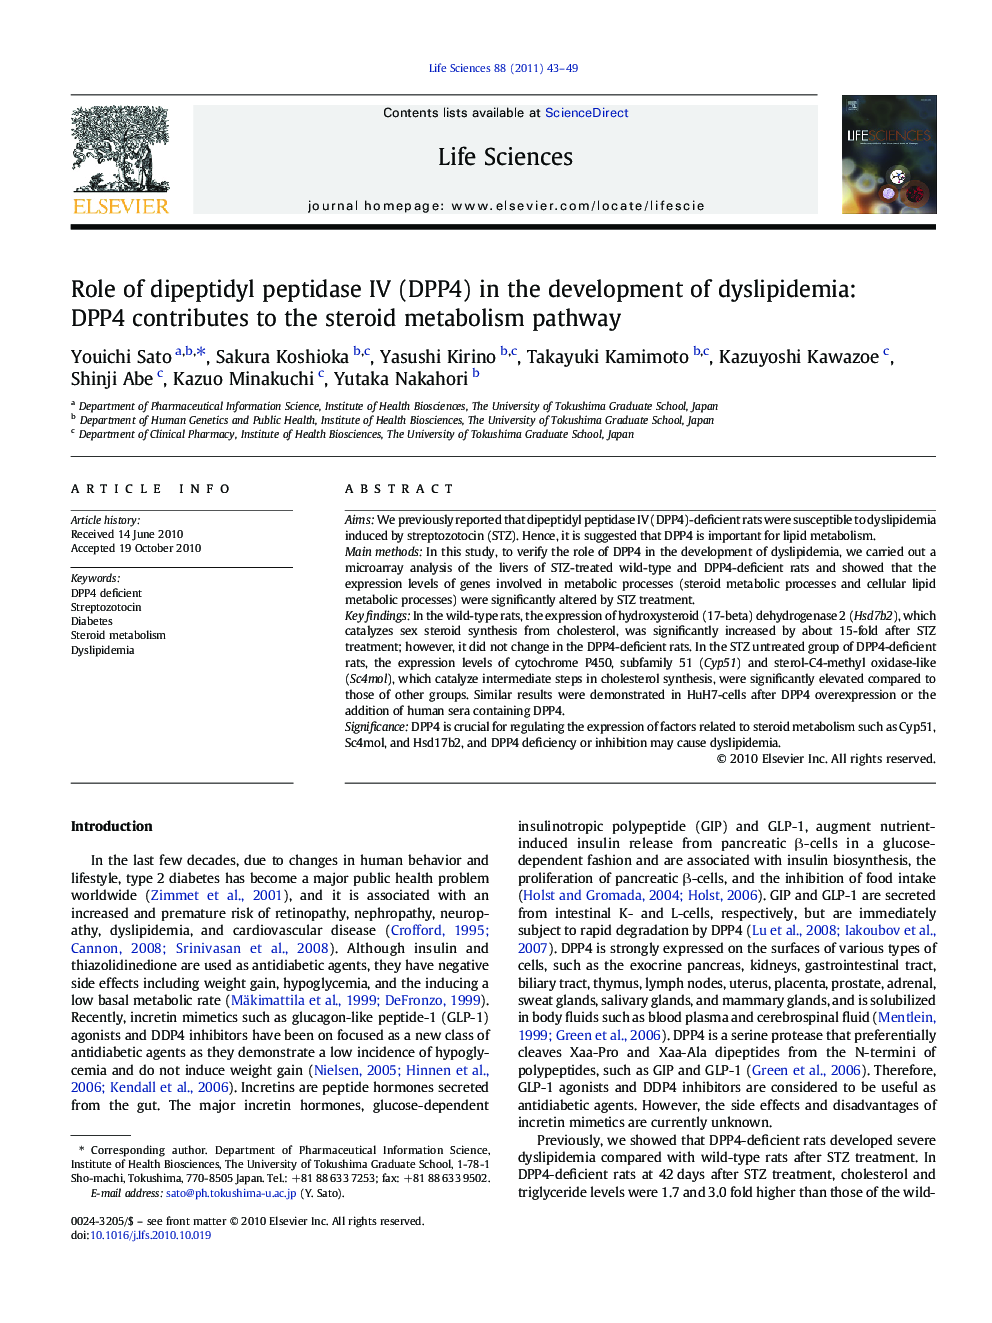 Role of dipeptidyl peptidase IV (DPP4) in the development of dyslipidemia: DPP4 contributes to the steroid metabolism pathway